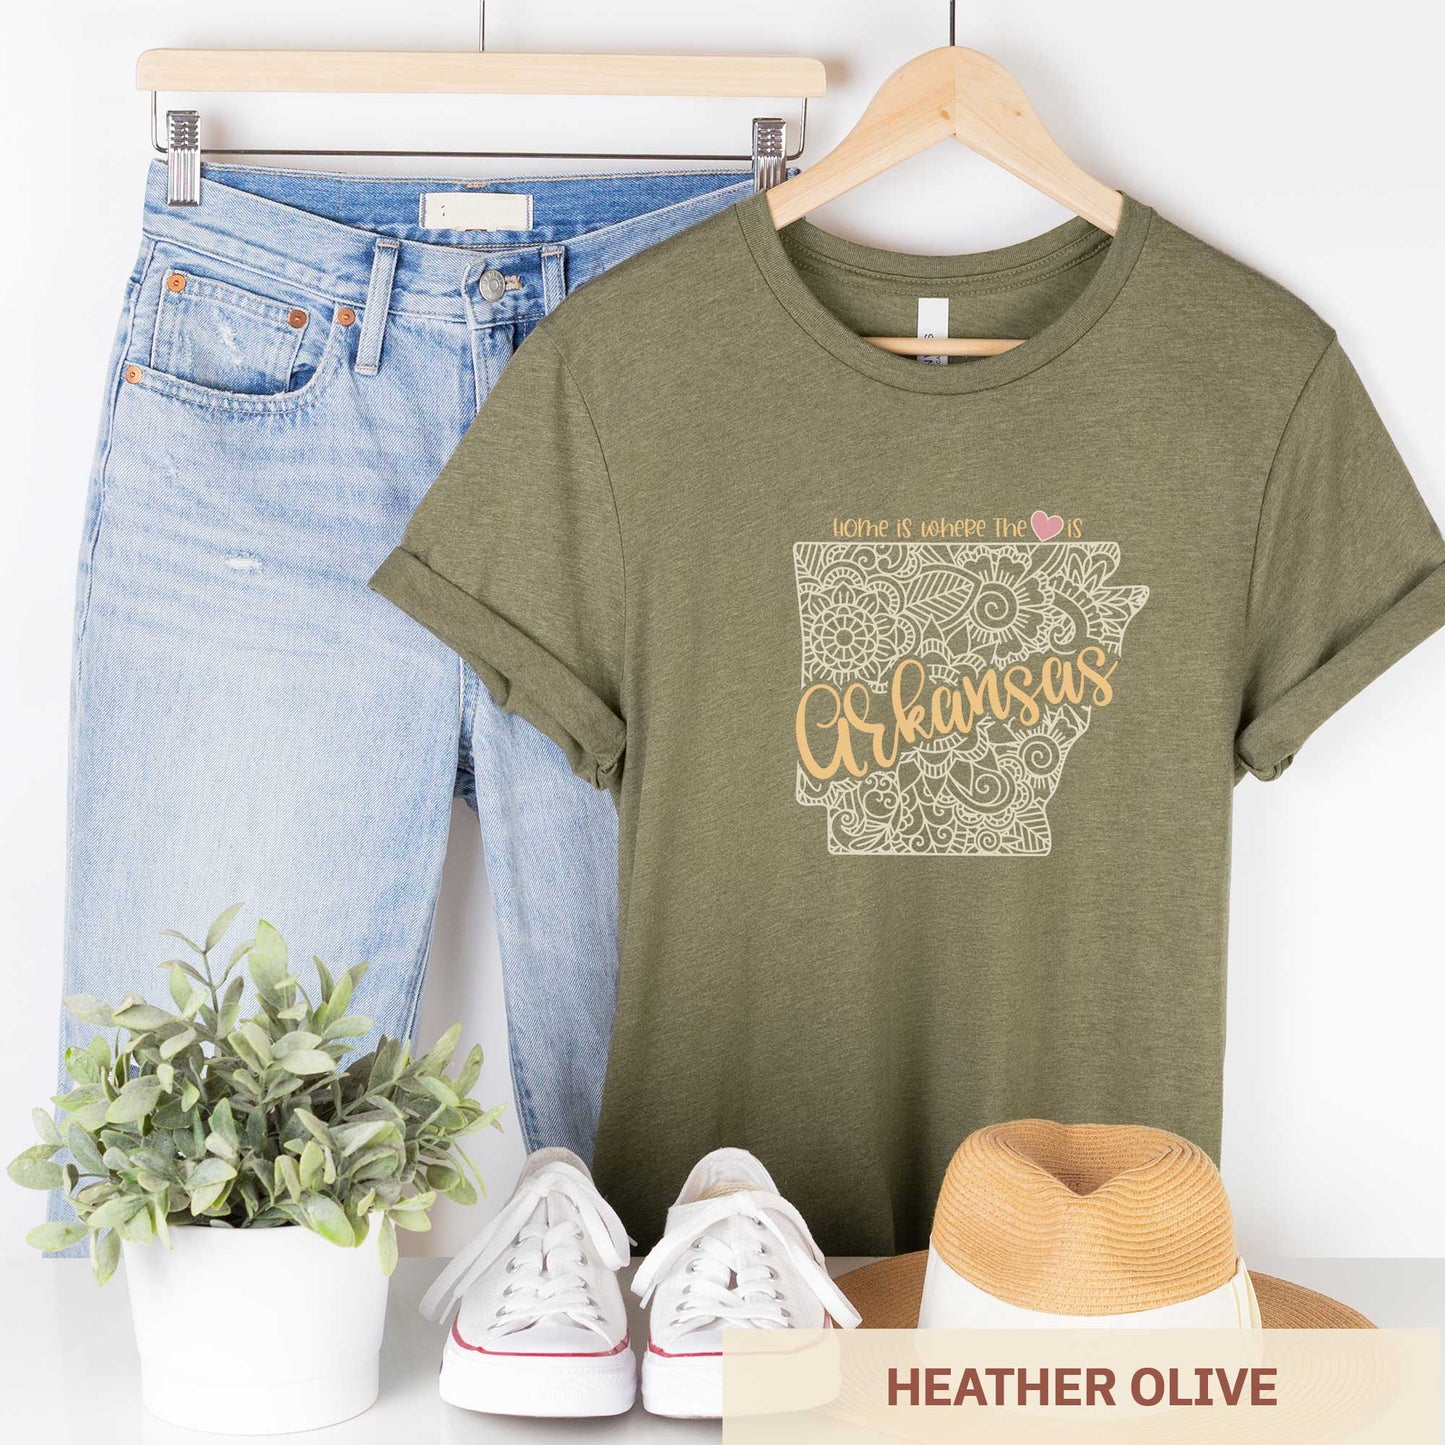 A hanging heather olive Bella Canvas t-shirt featuring a mandala in the shape of Arkansas with the words home is where the heart is.